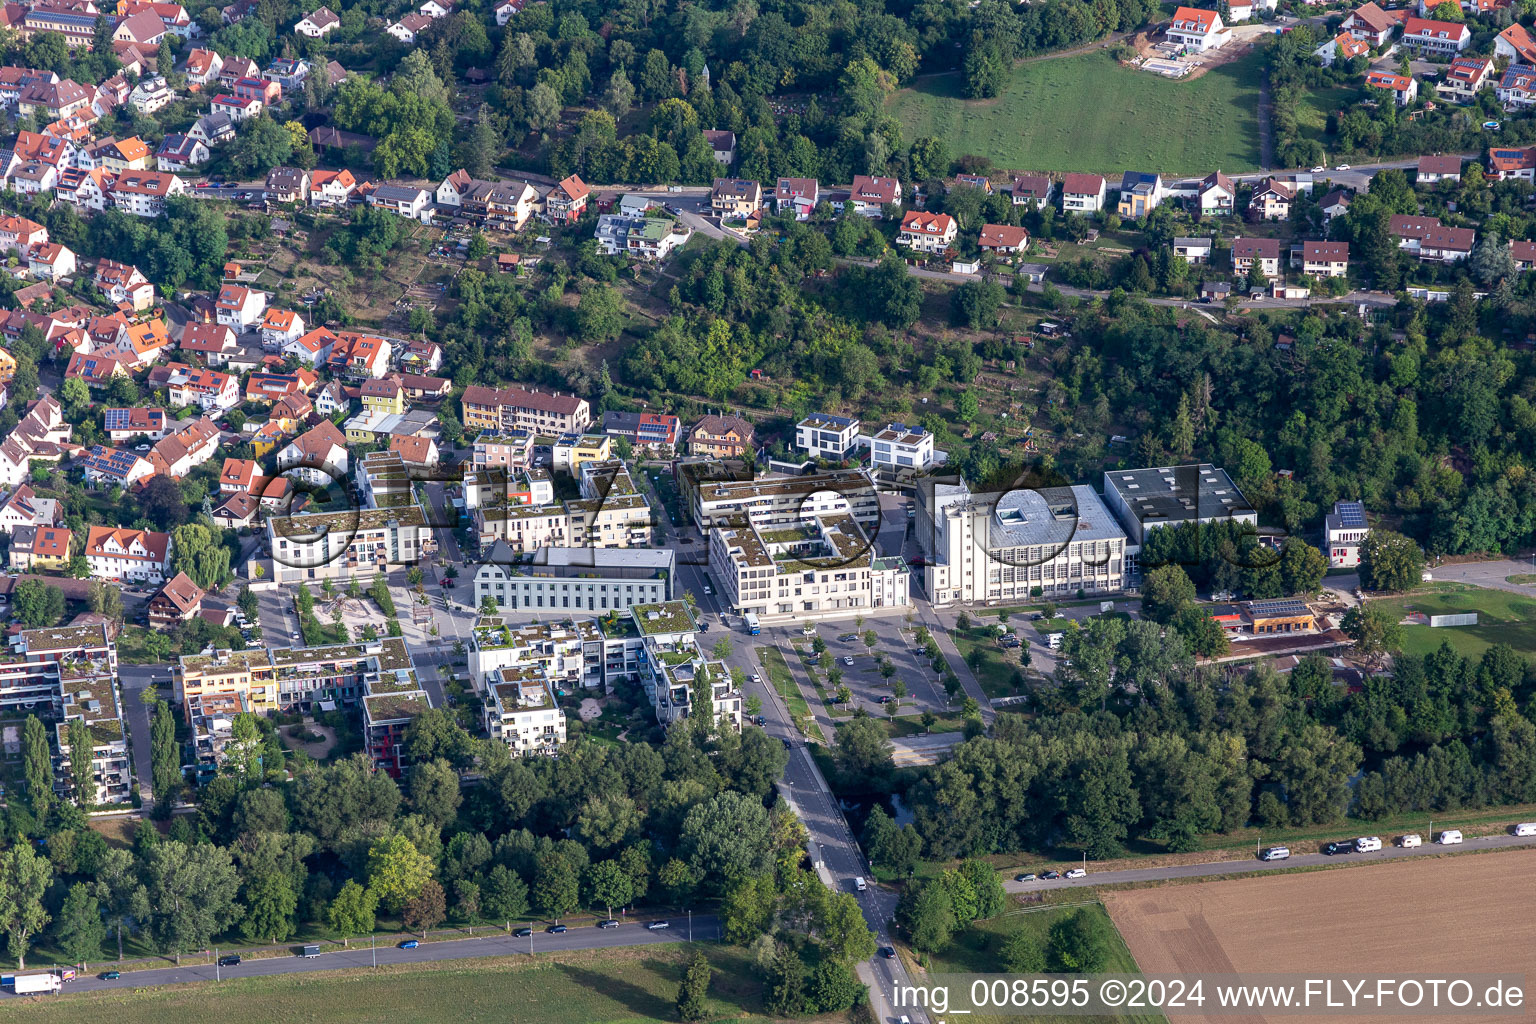 Industrial estate and company settlement Alte Weberei with Egeria GmbH and Baer-Tiger-Wolf in Tuebingen in the state Baden-Wuerttemberg, Germany